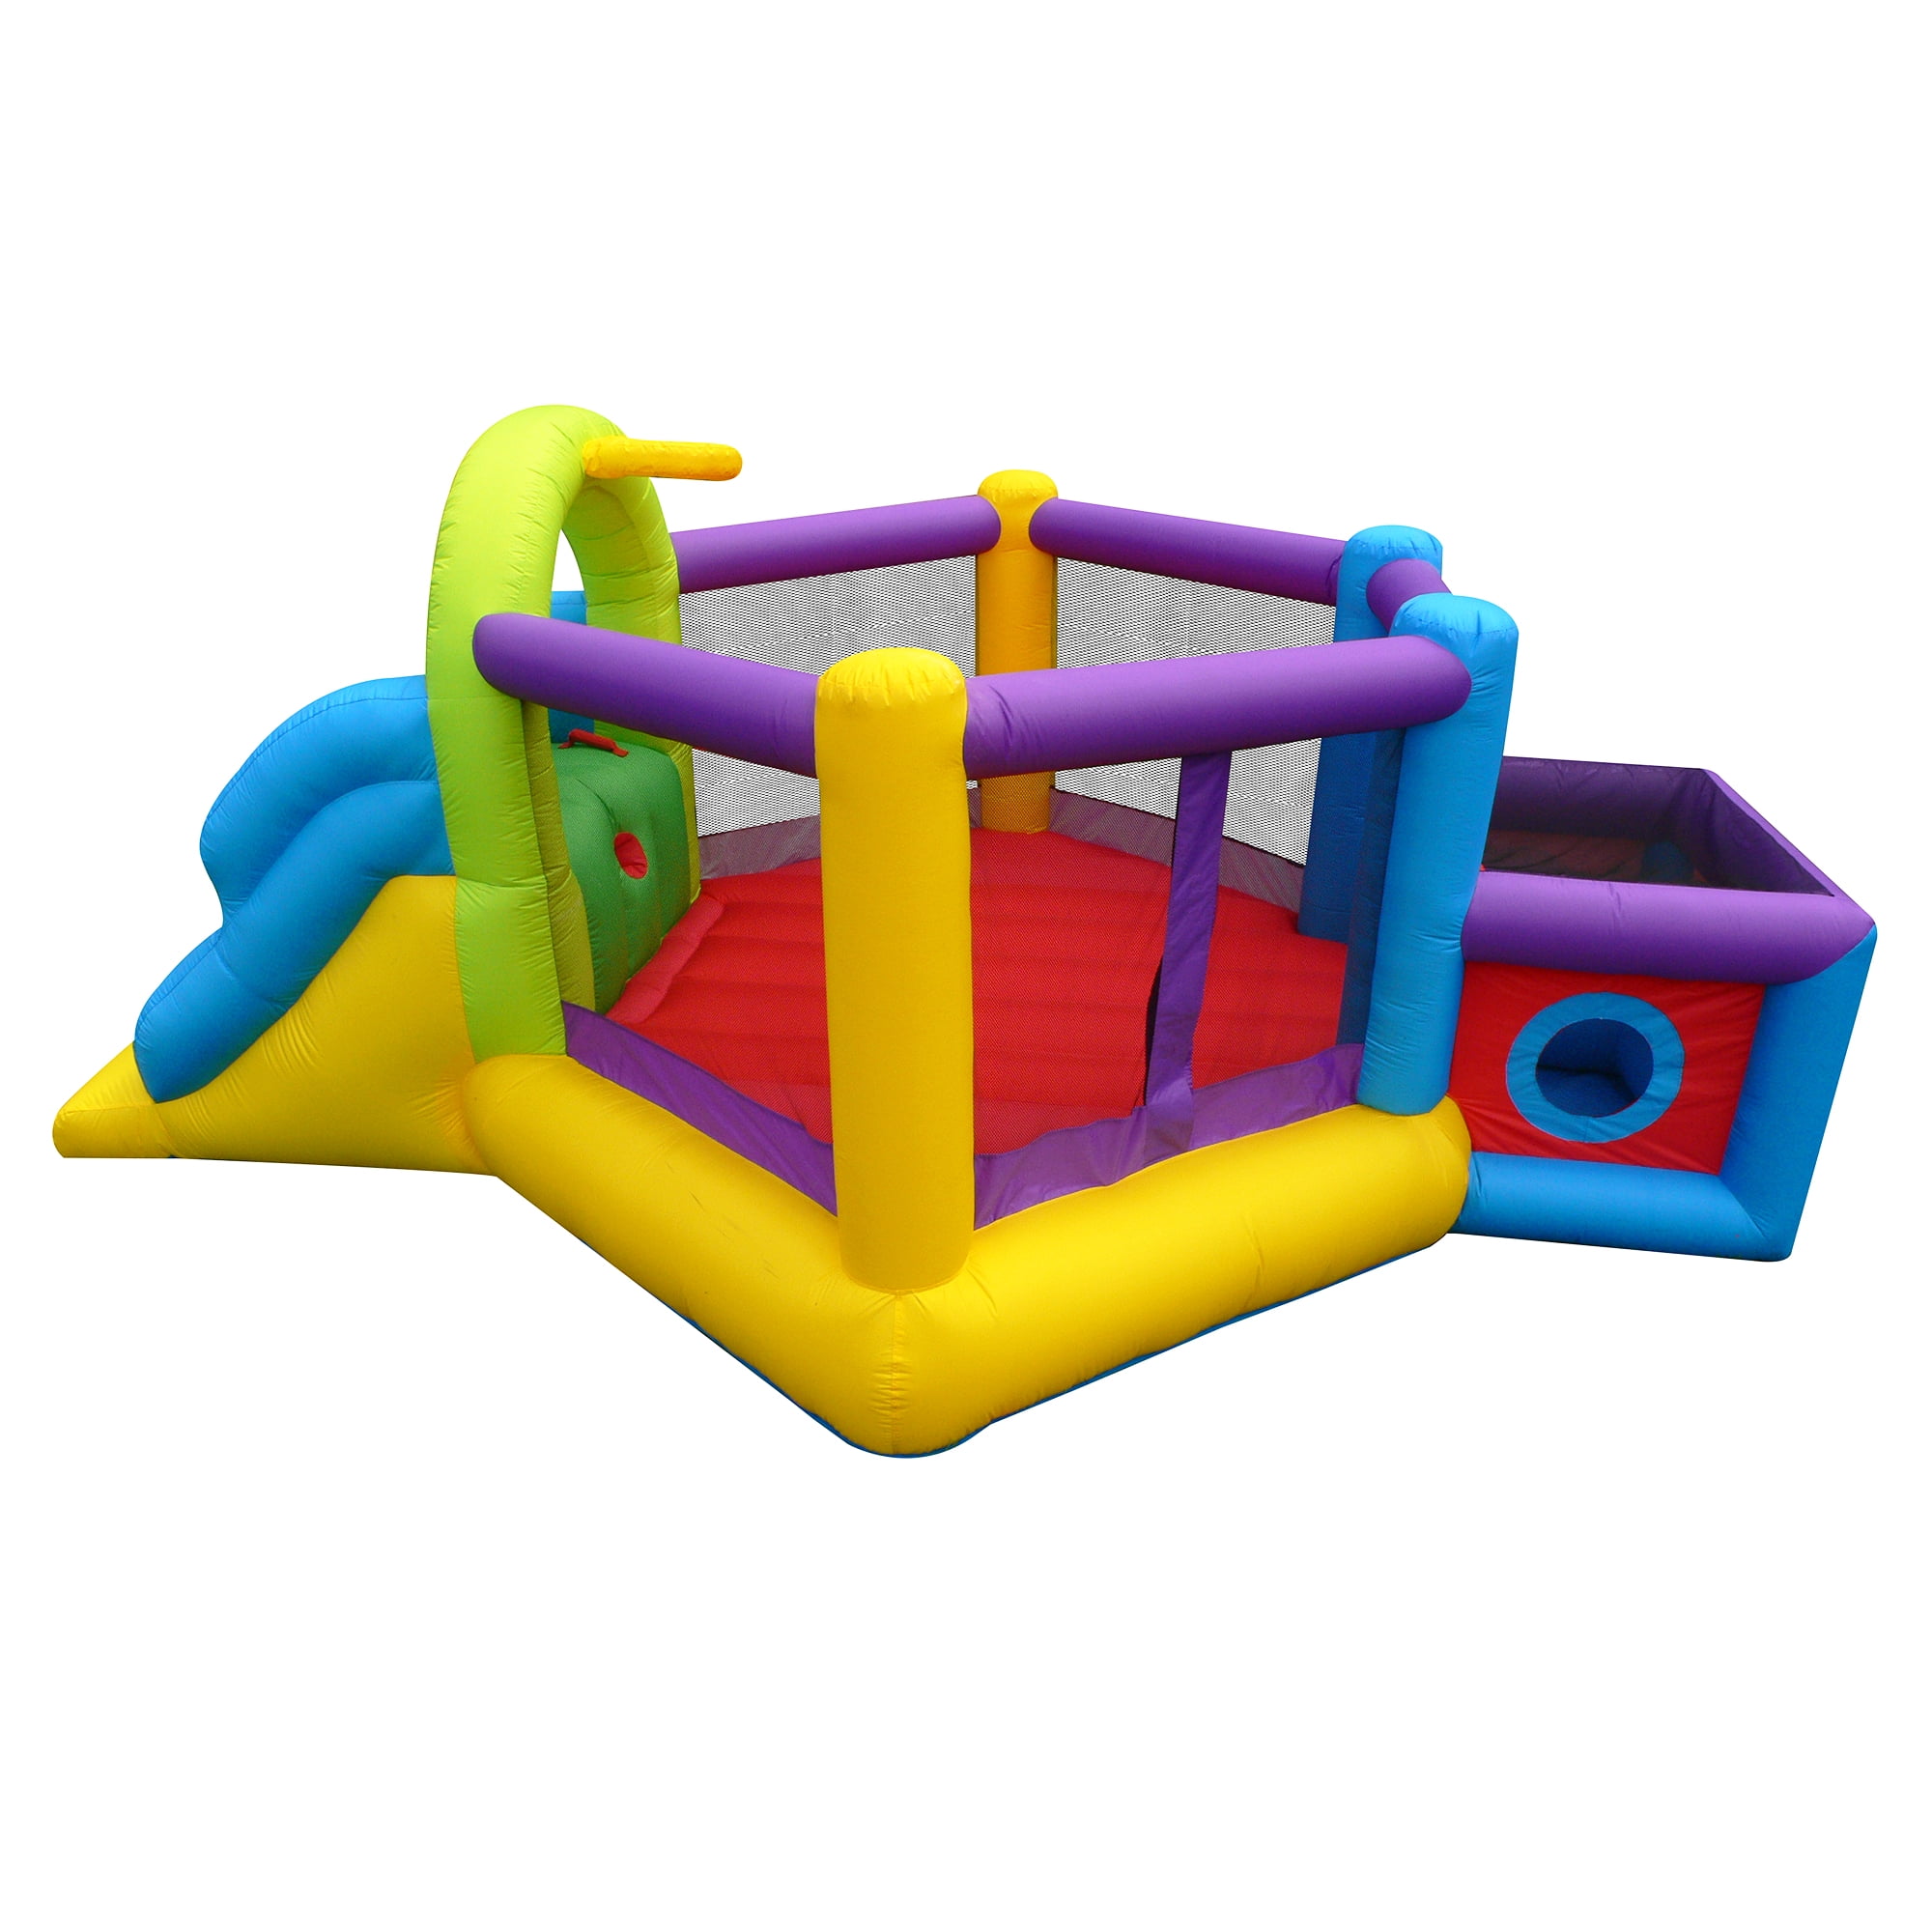 Spin Art Refill Supplies - Bounce House Rental in Fort Worth